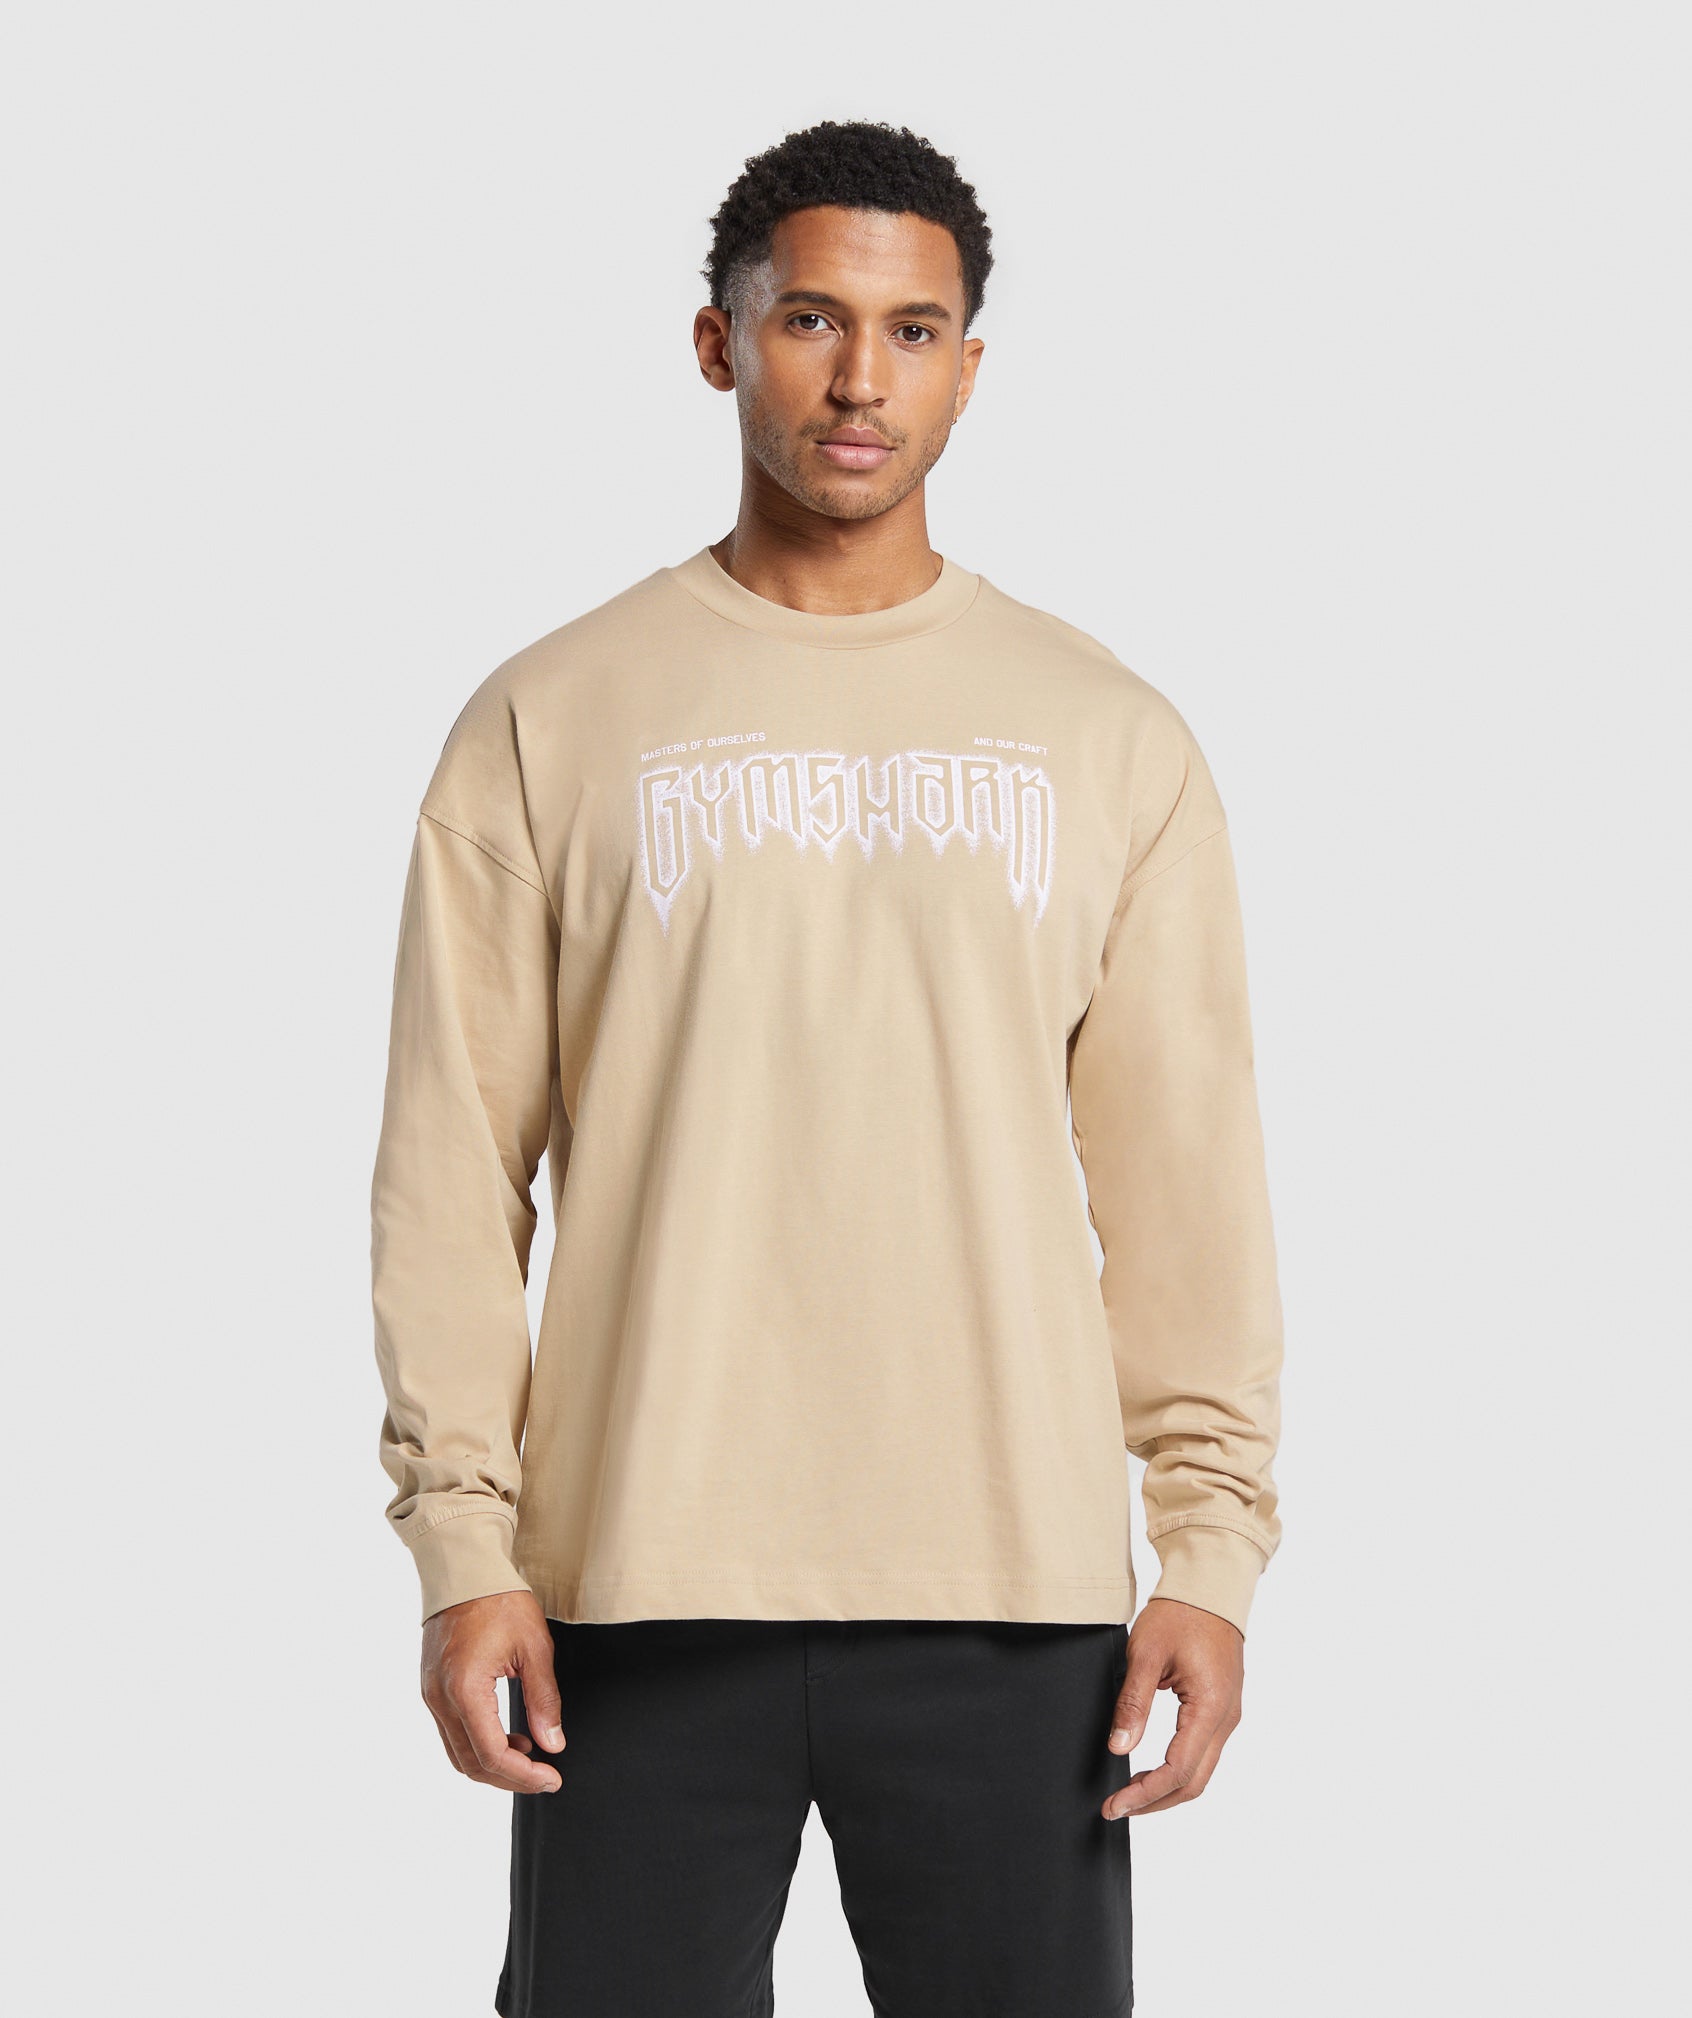 Masters of Our Craft Long Sleeve T-Shirt in Vanilla Beige - view 1